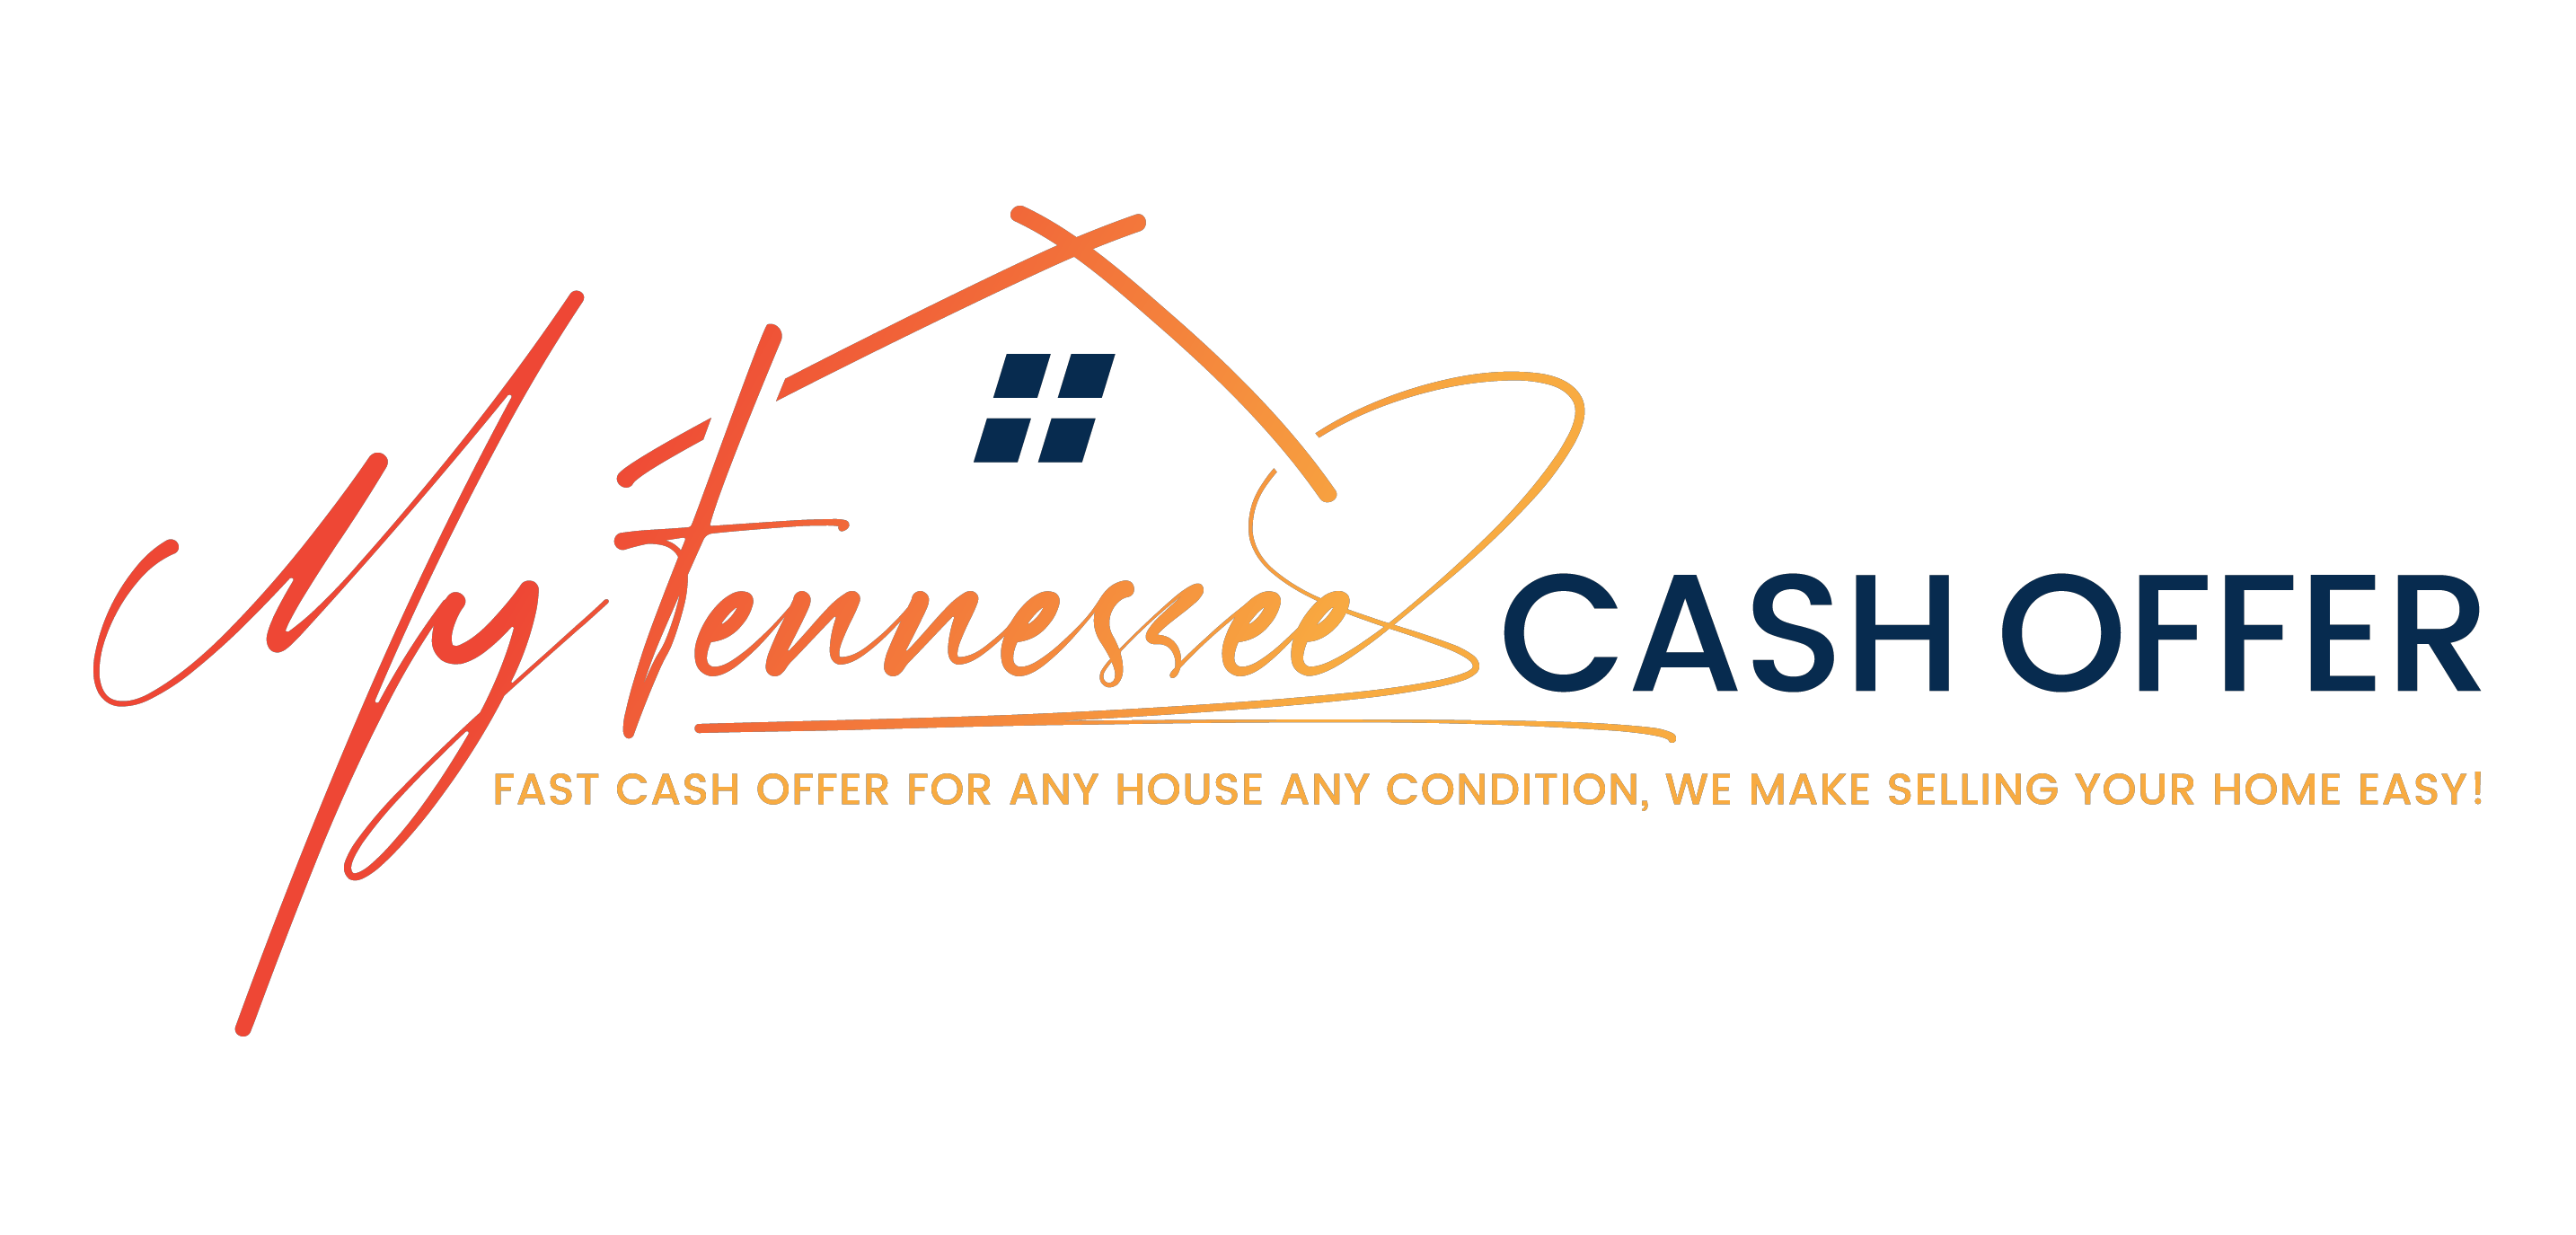 My Tennessee Cash Offer logo